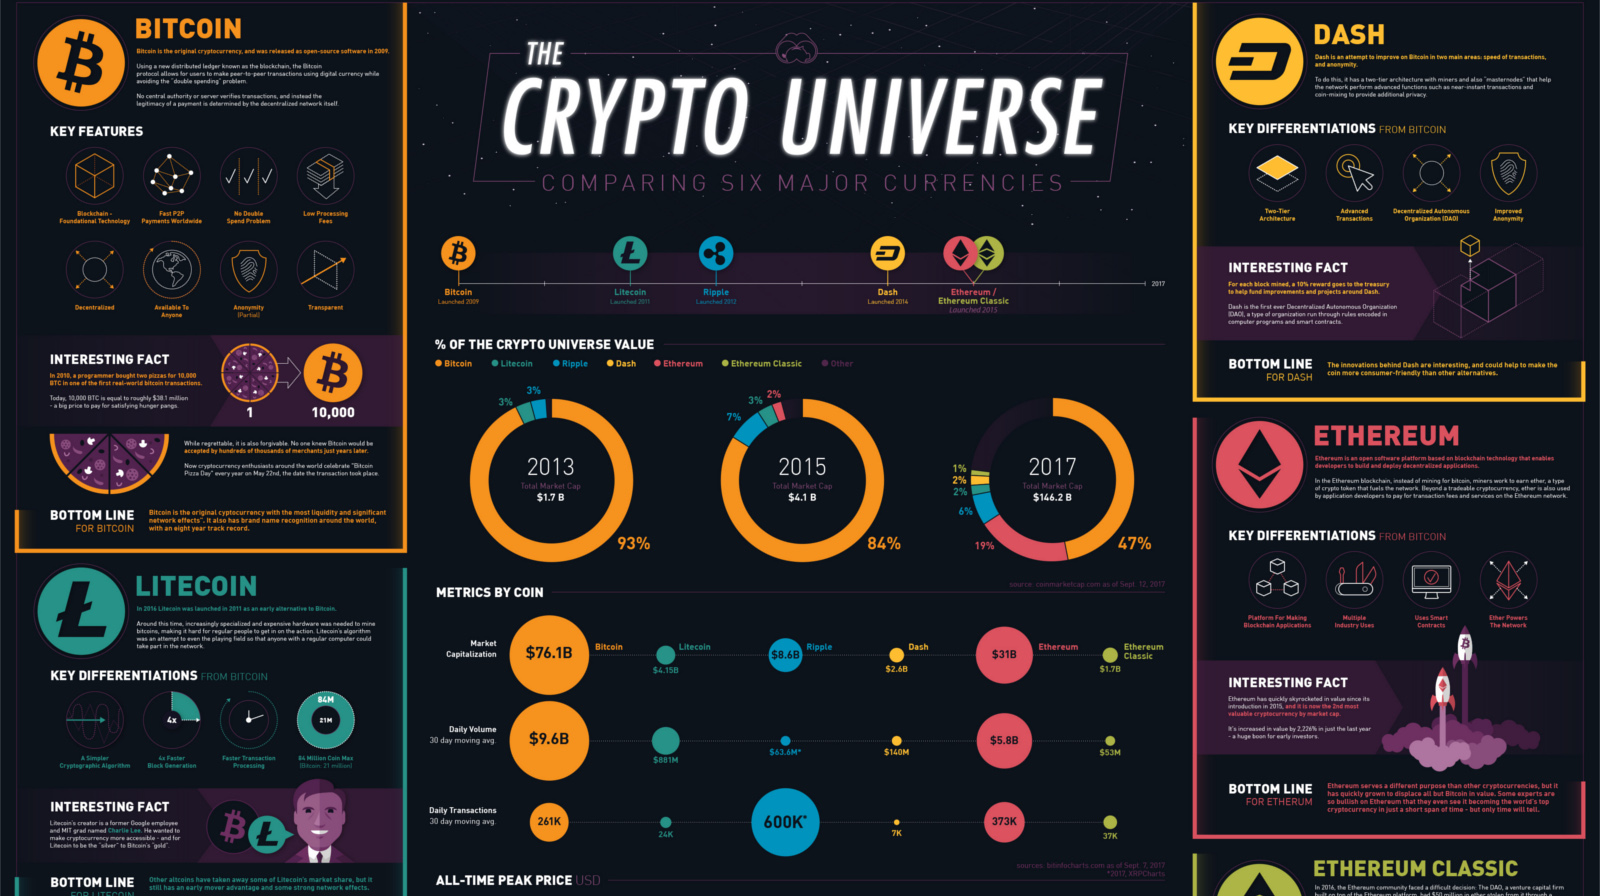 This Giant Infographic Compares Bitcoin Ethereum And Other Major Cryptocurrencies